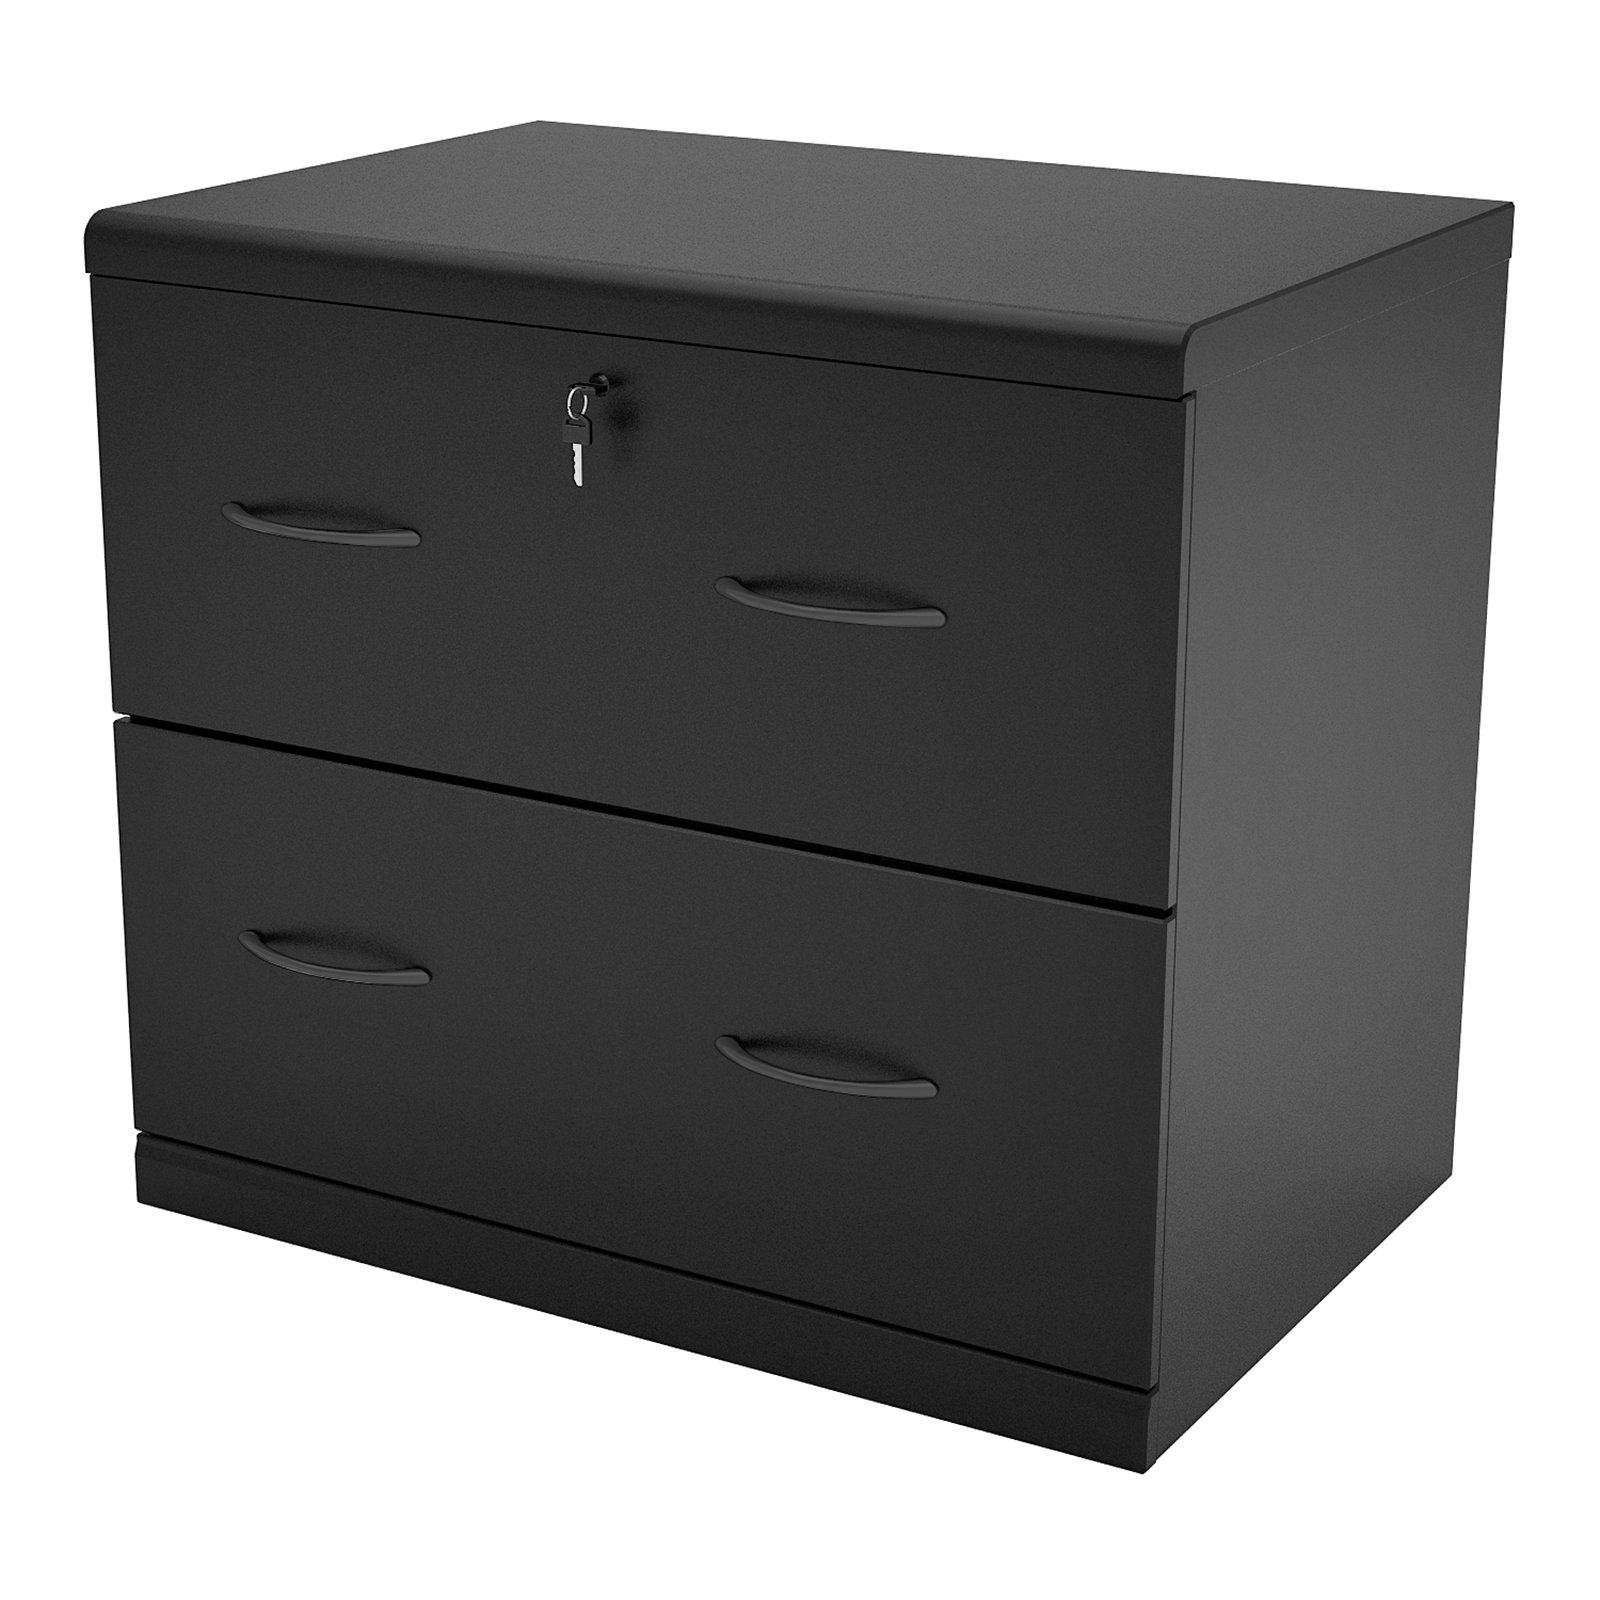 2 Drawer Lateral Wood Lockable Filing Cabinet Black Walmart with regard to dimensions 1600 X 1600